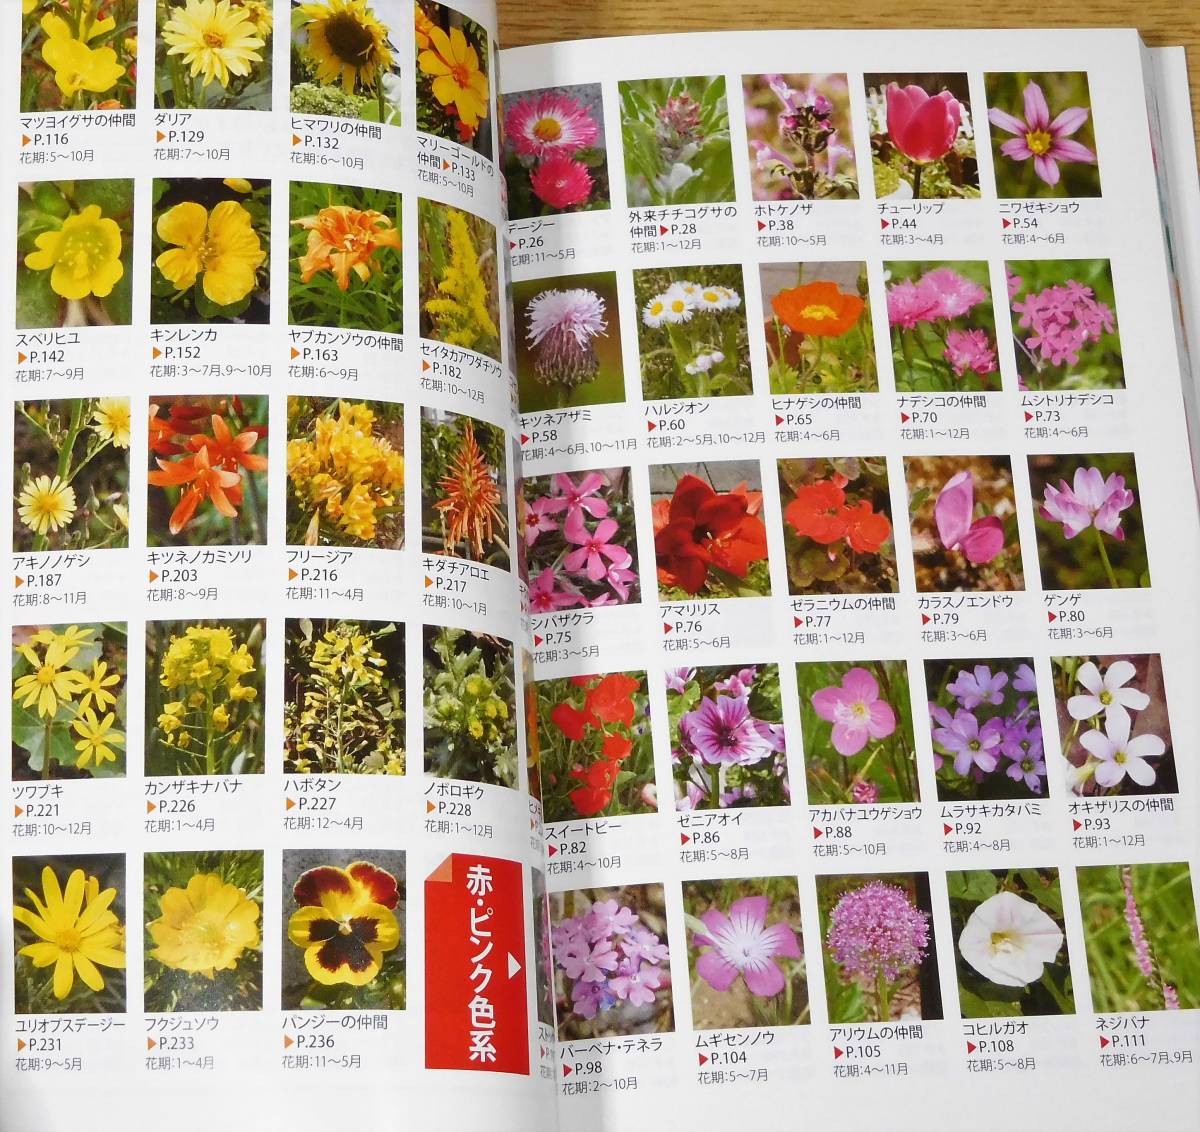  walk. flower illustrated reference book 507 kind all color season another . easy to understand 1 jpy ~